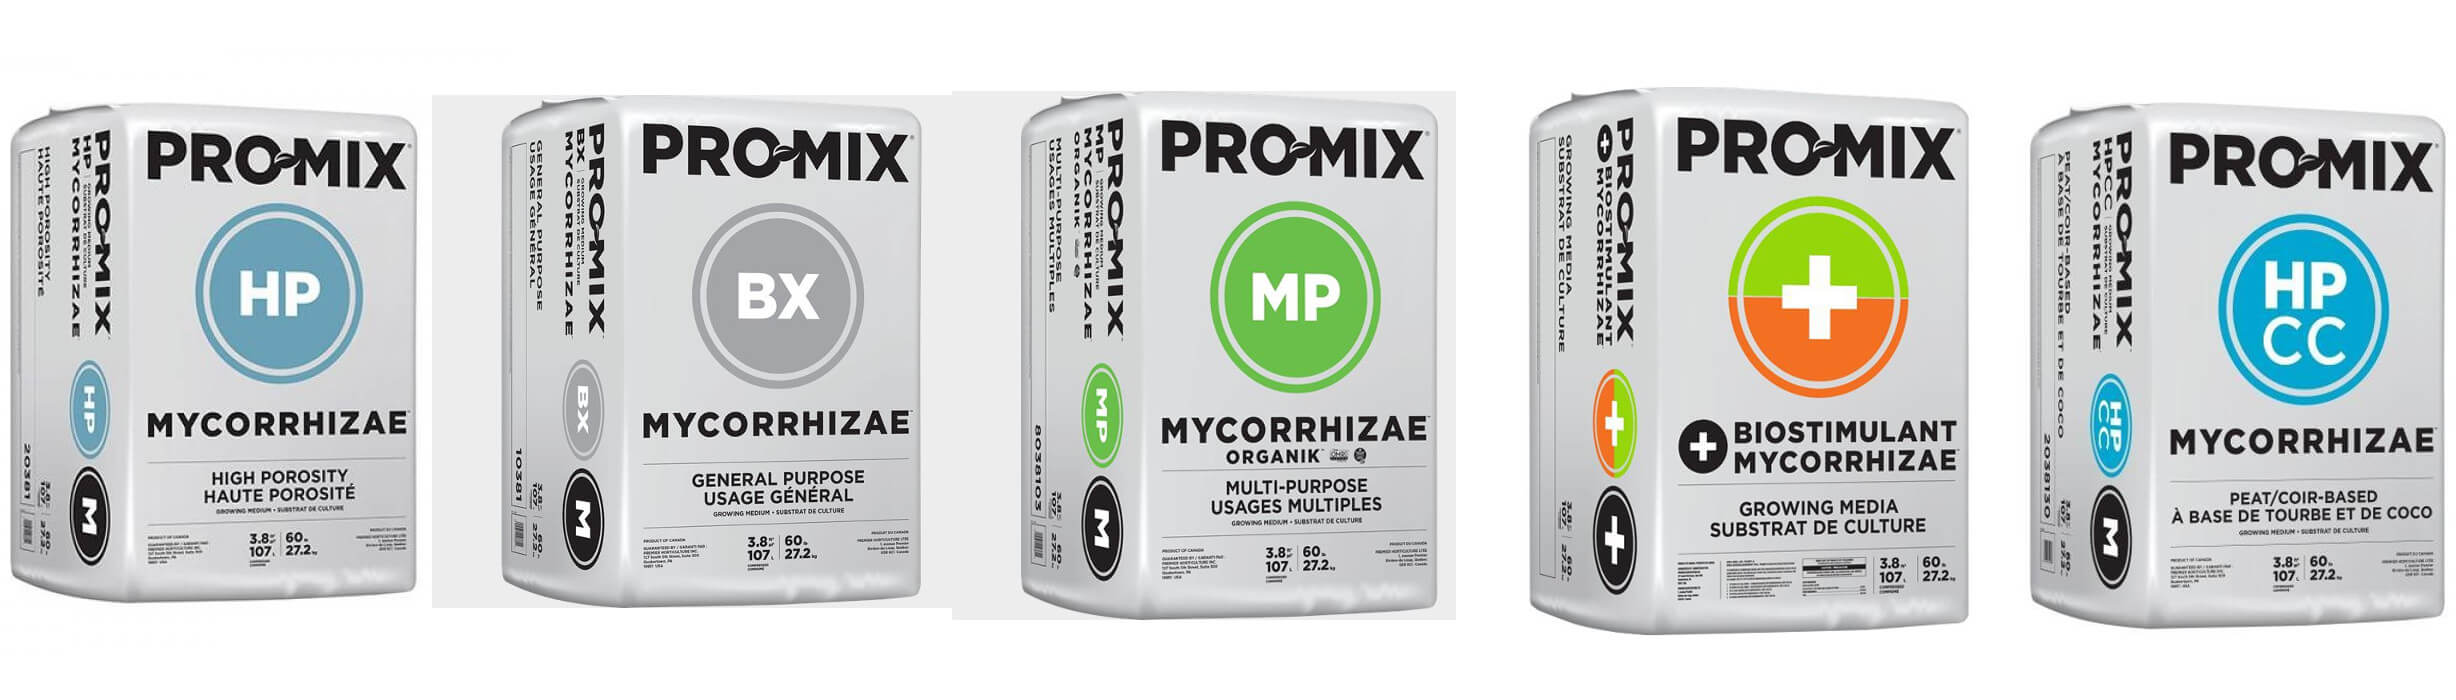 Pro-mix Products